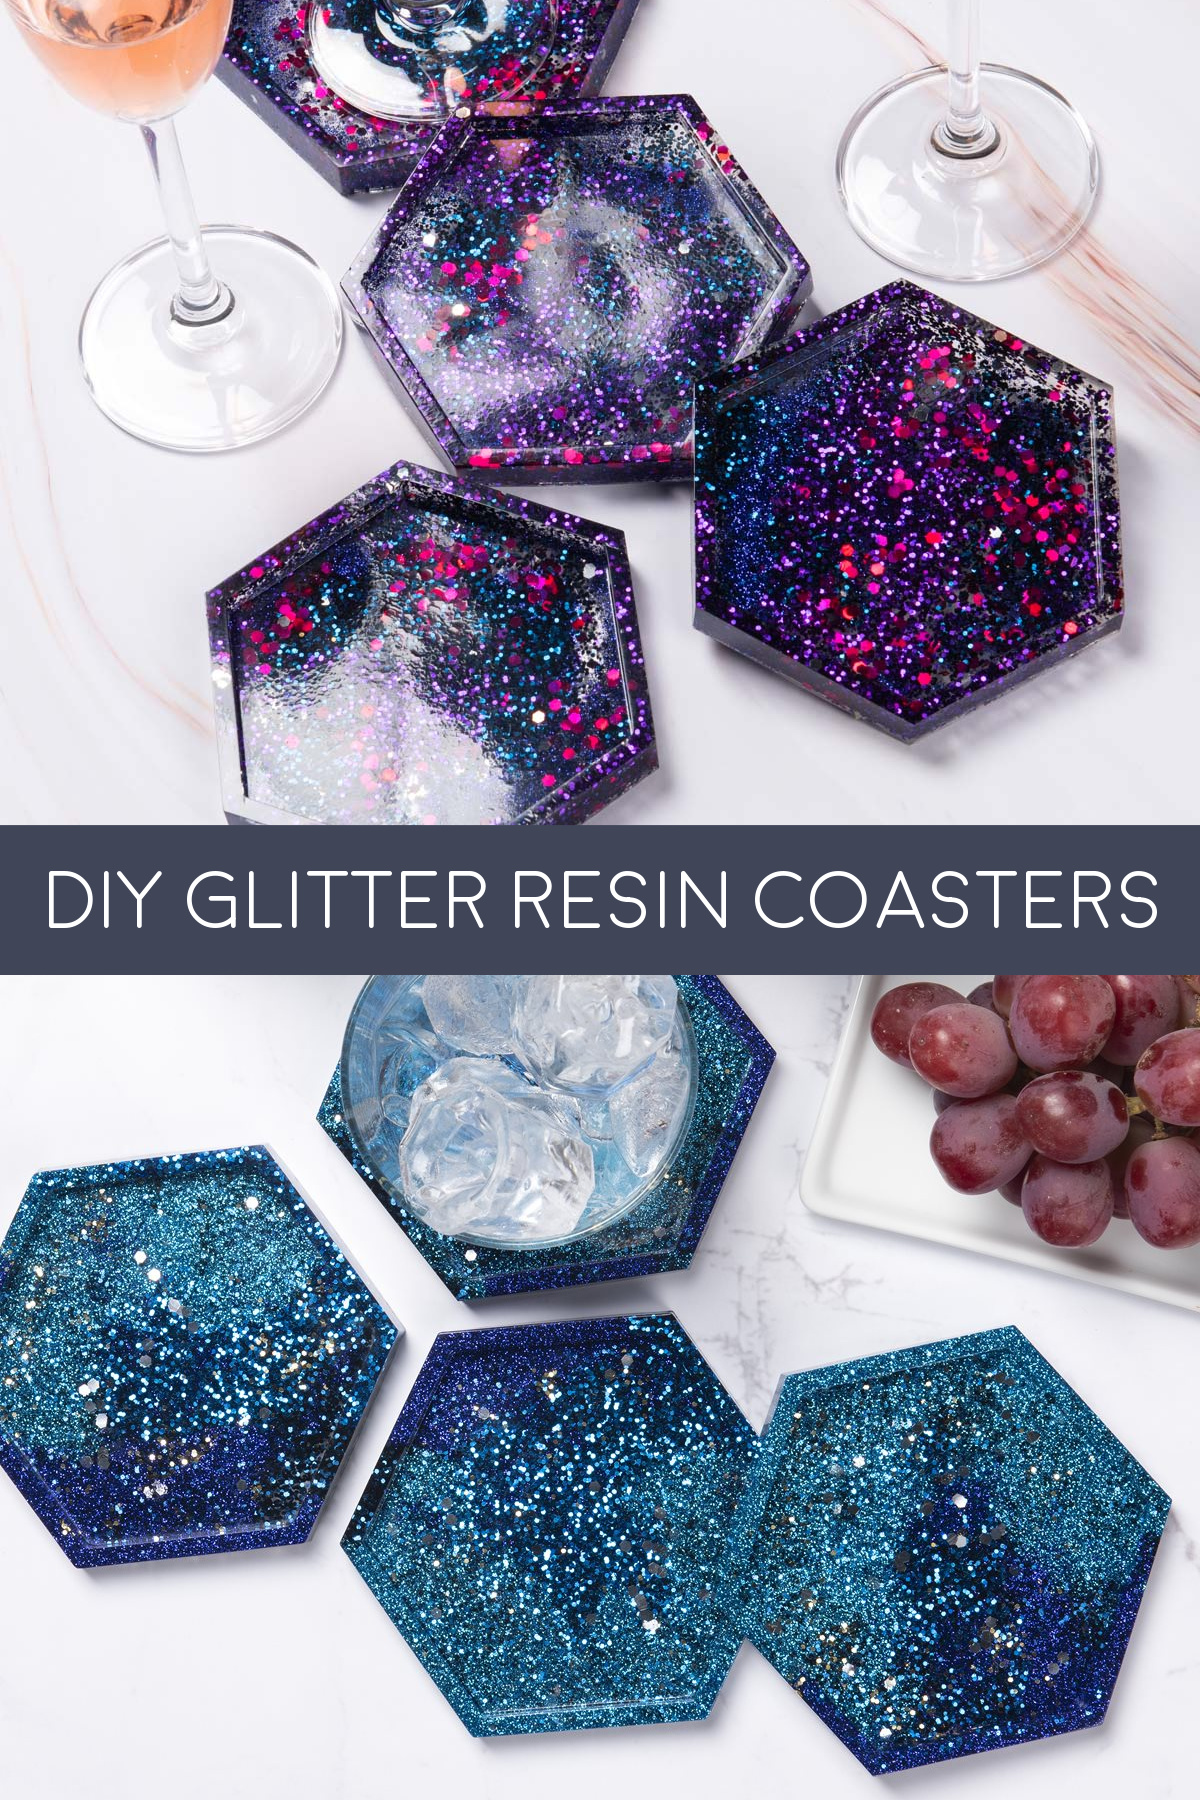 Glitter Resin Coasters for Gifts or Parties! - Mod Podge Rocks